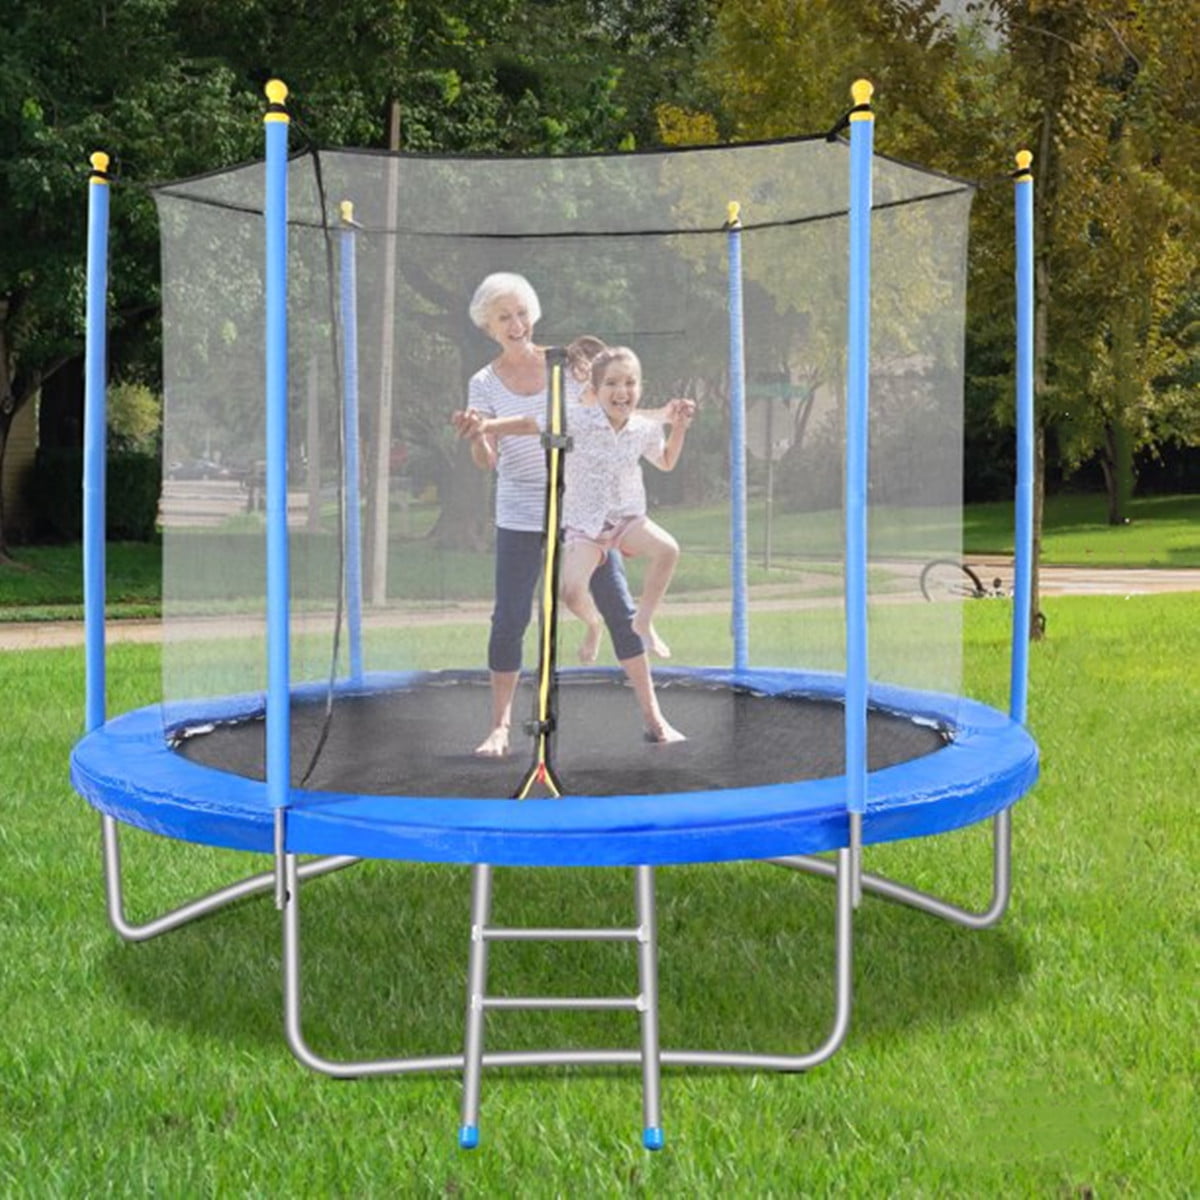 Giantex Trampoline for Kids No-Gap Safe Design ASTM Approved 55'' Mini Kids Trampoline with Safety Enclosure Net Easy to Assemble 4.6 Ft Outdoor Indoor Small Toddler Trampoline for Kids Toy Birthday Gift 